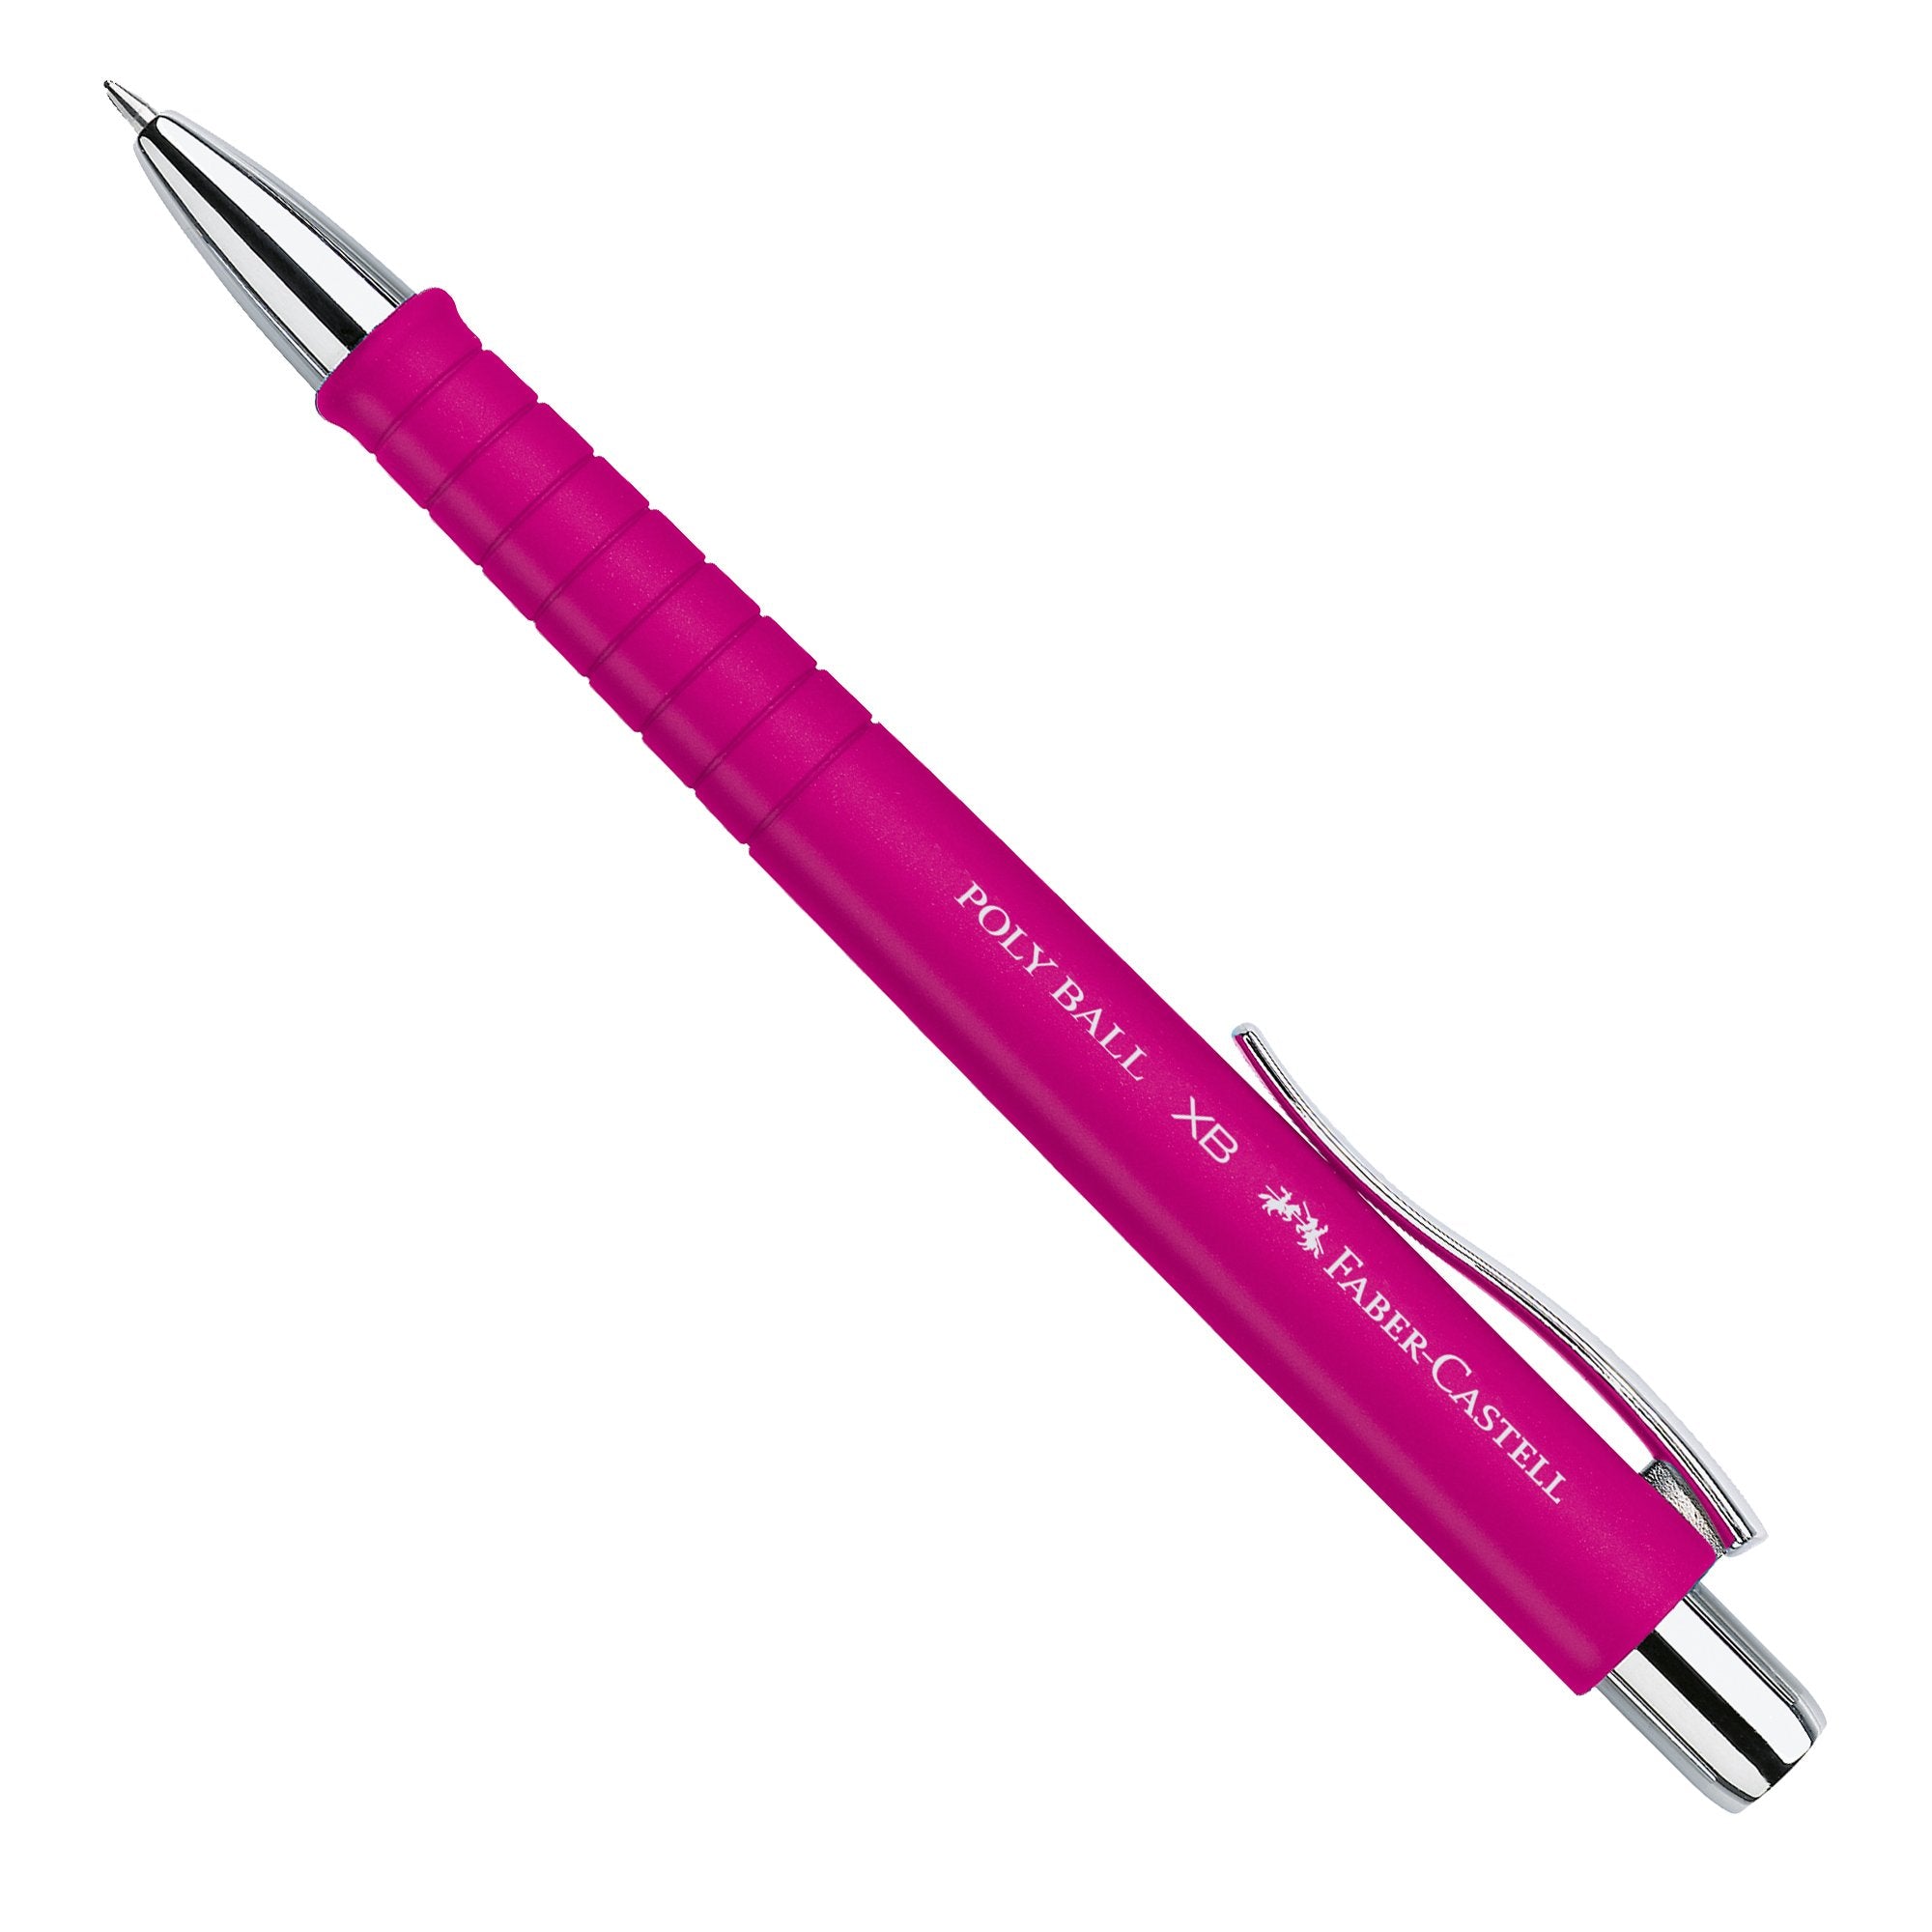 faber-castell-penna-sfera-0-7mm-poly-ball-fusto-rosa-faber-castell